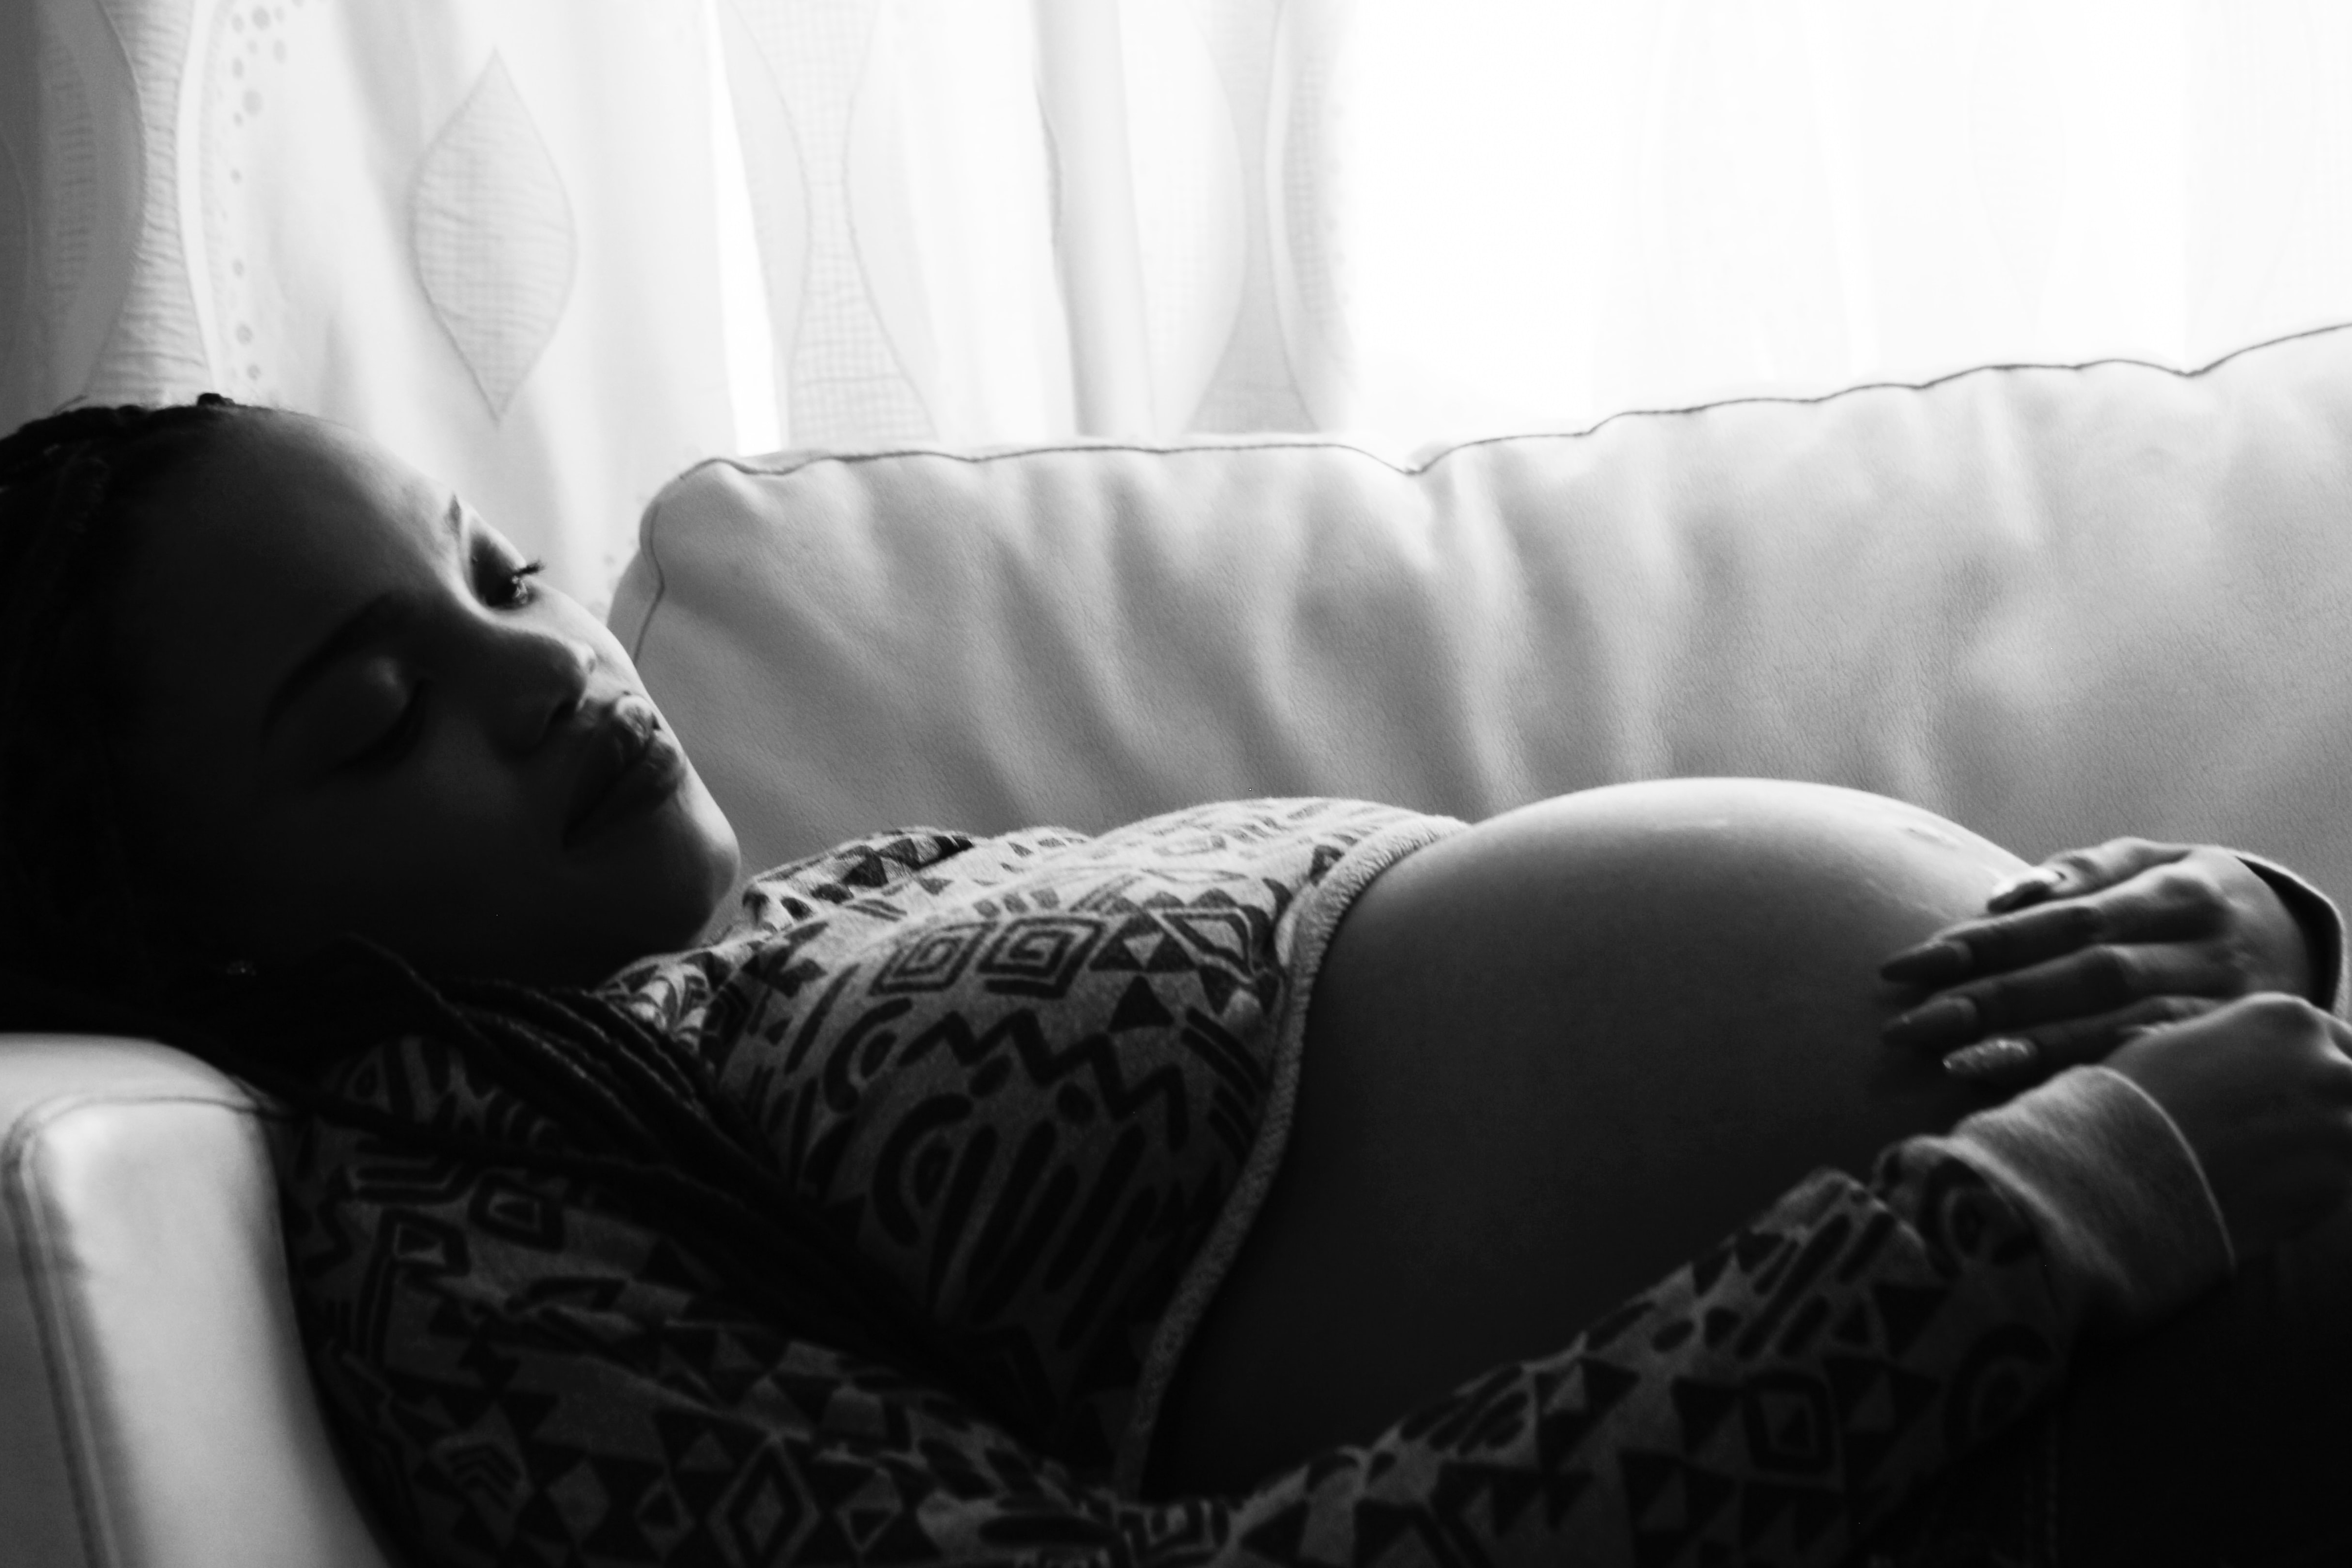 A Black pregnant woman recilines on a sofa by a window.